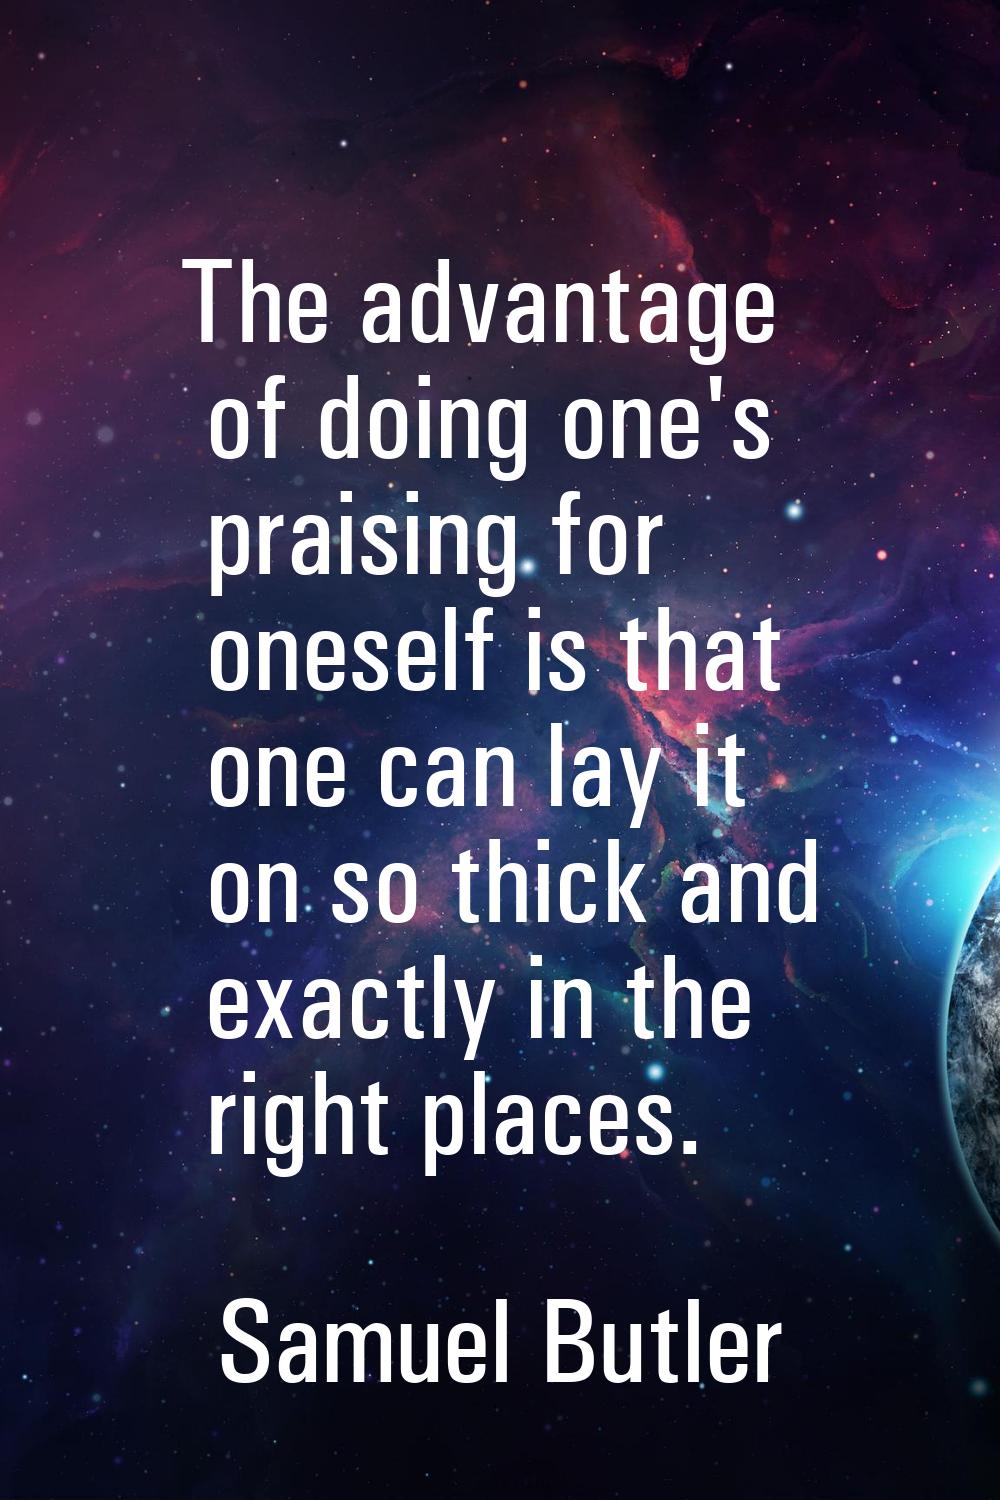 The advantage of doing one's praising for oneself is that one can lay it on so thick and exactly in